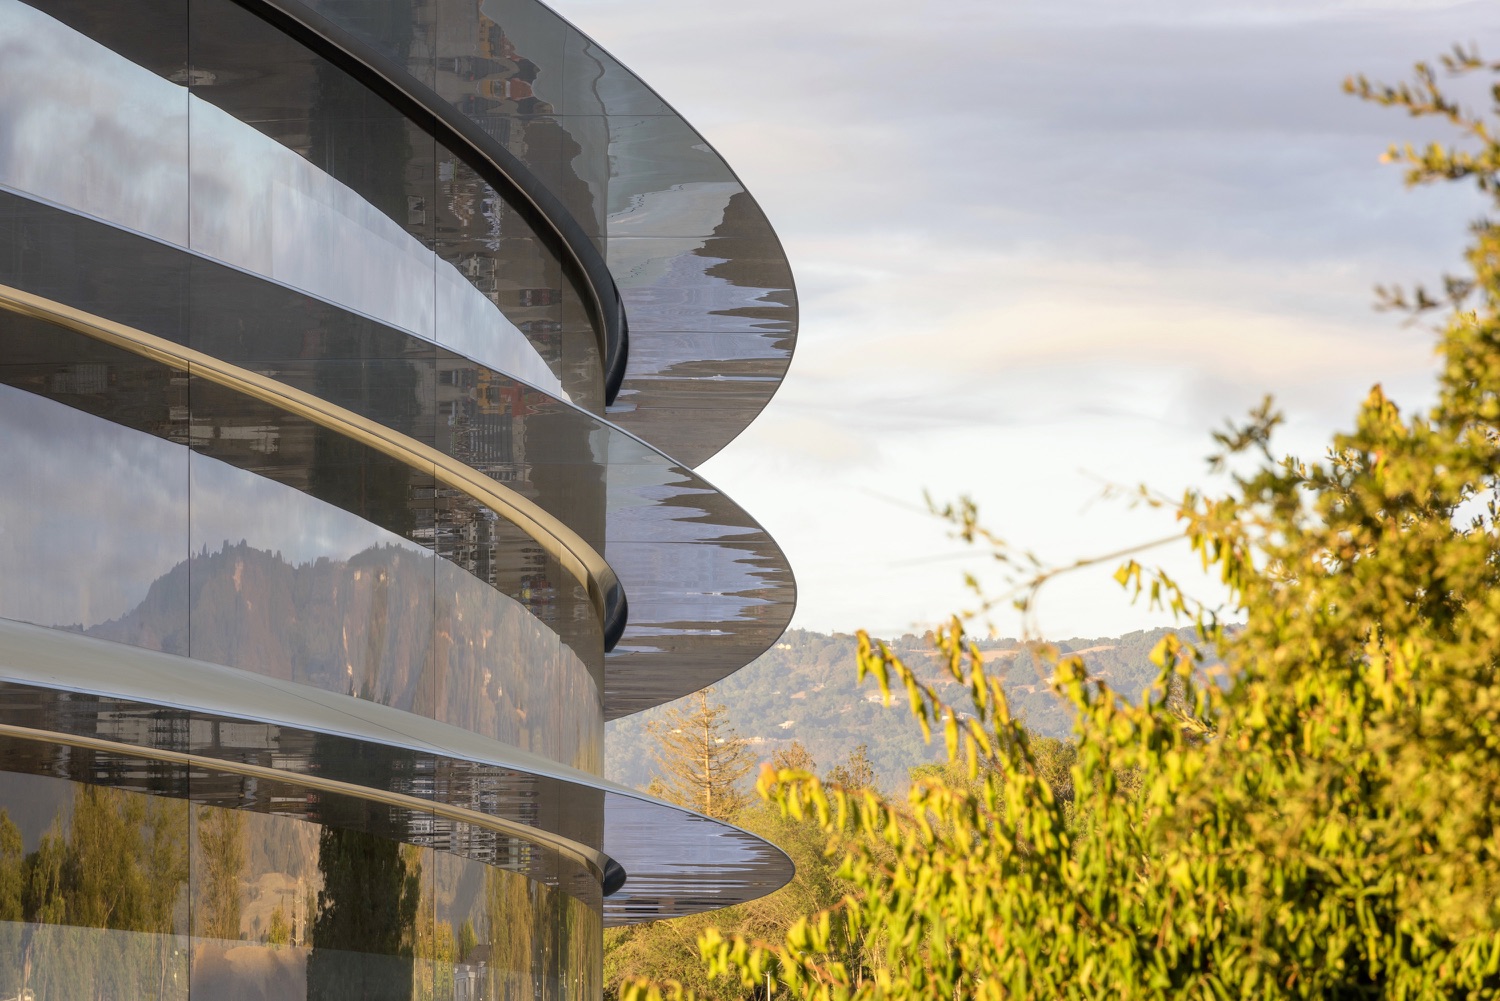 Bloomberg Details How Apple Park Employees Will Return to Work During COVID-19 Crisis